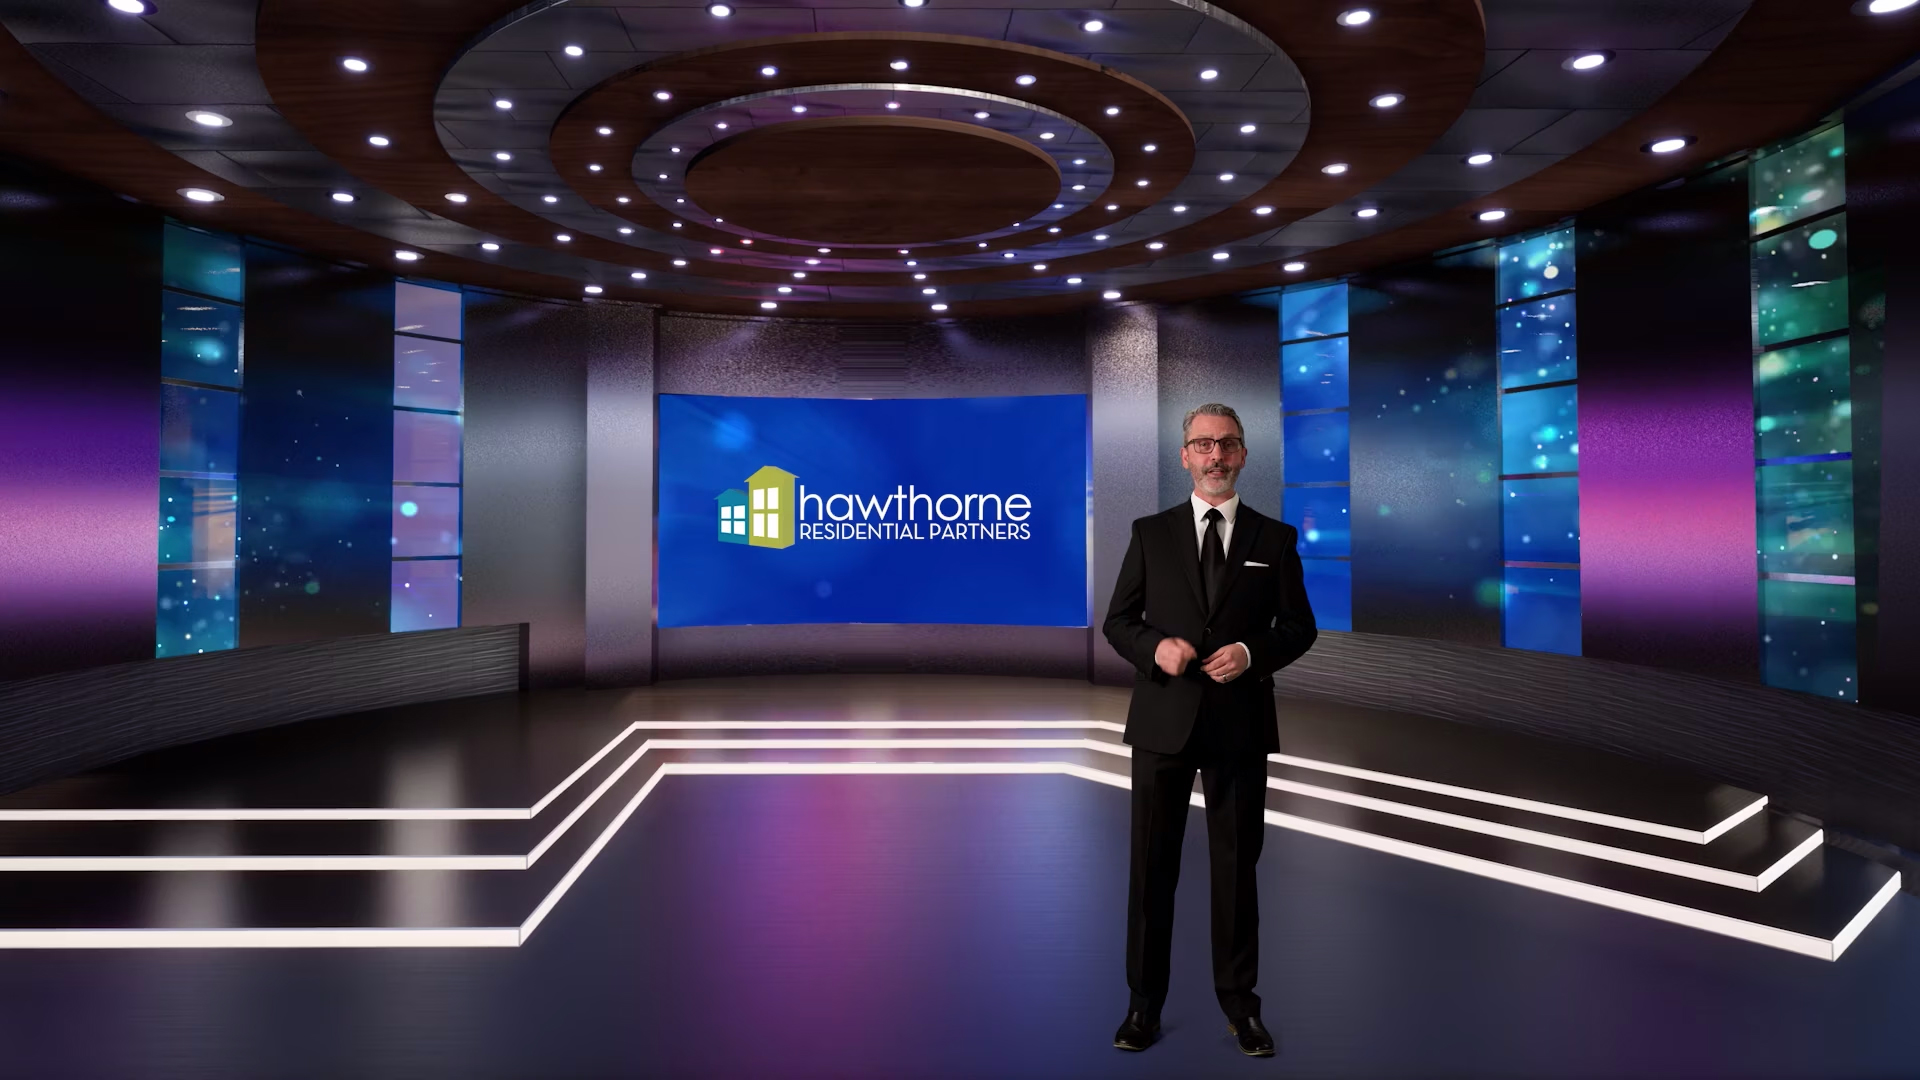 Hawthorne Residential Partners virtual awards show filmed by K2 Productions